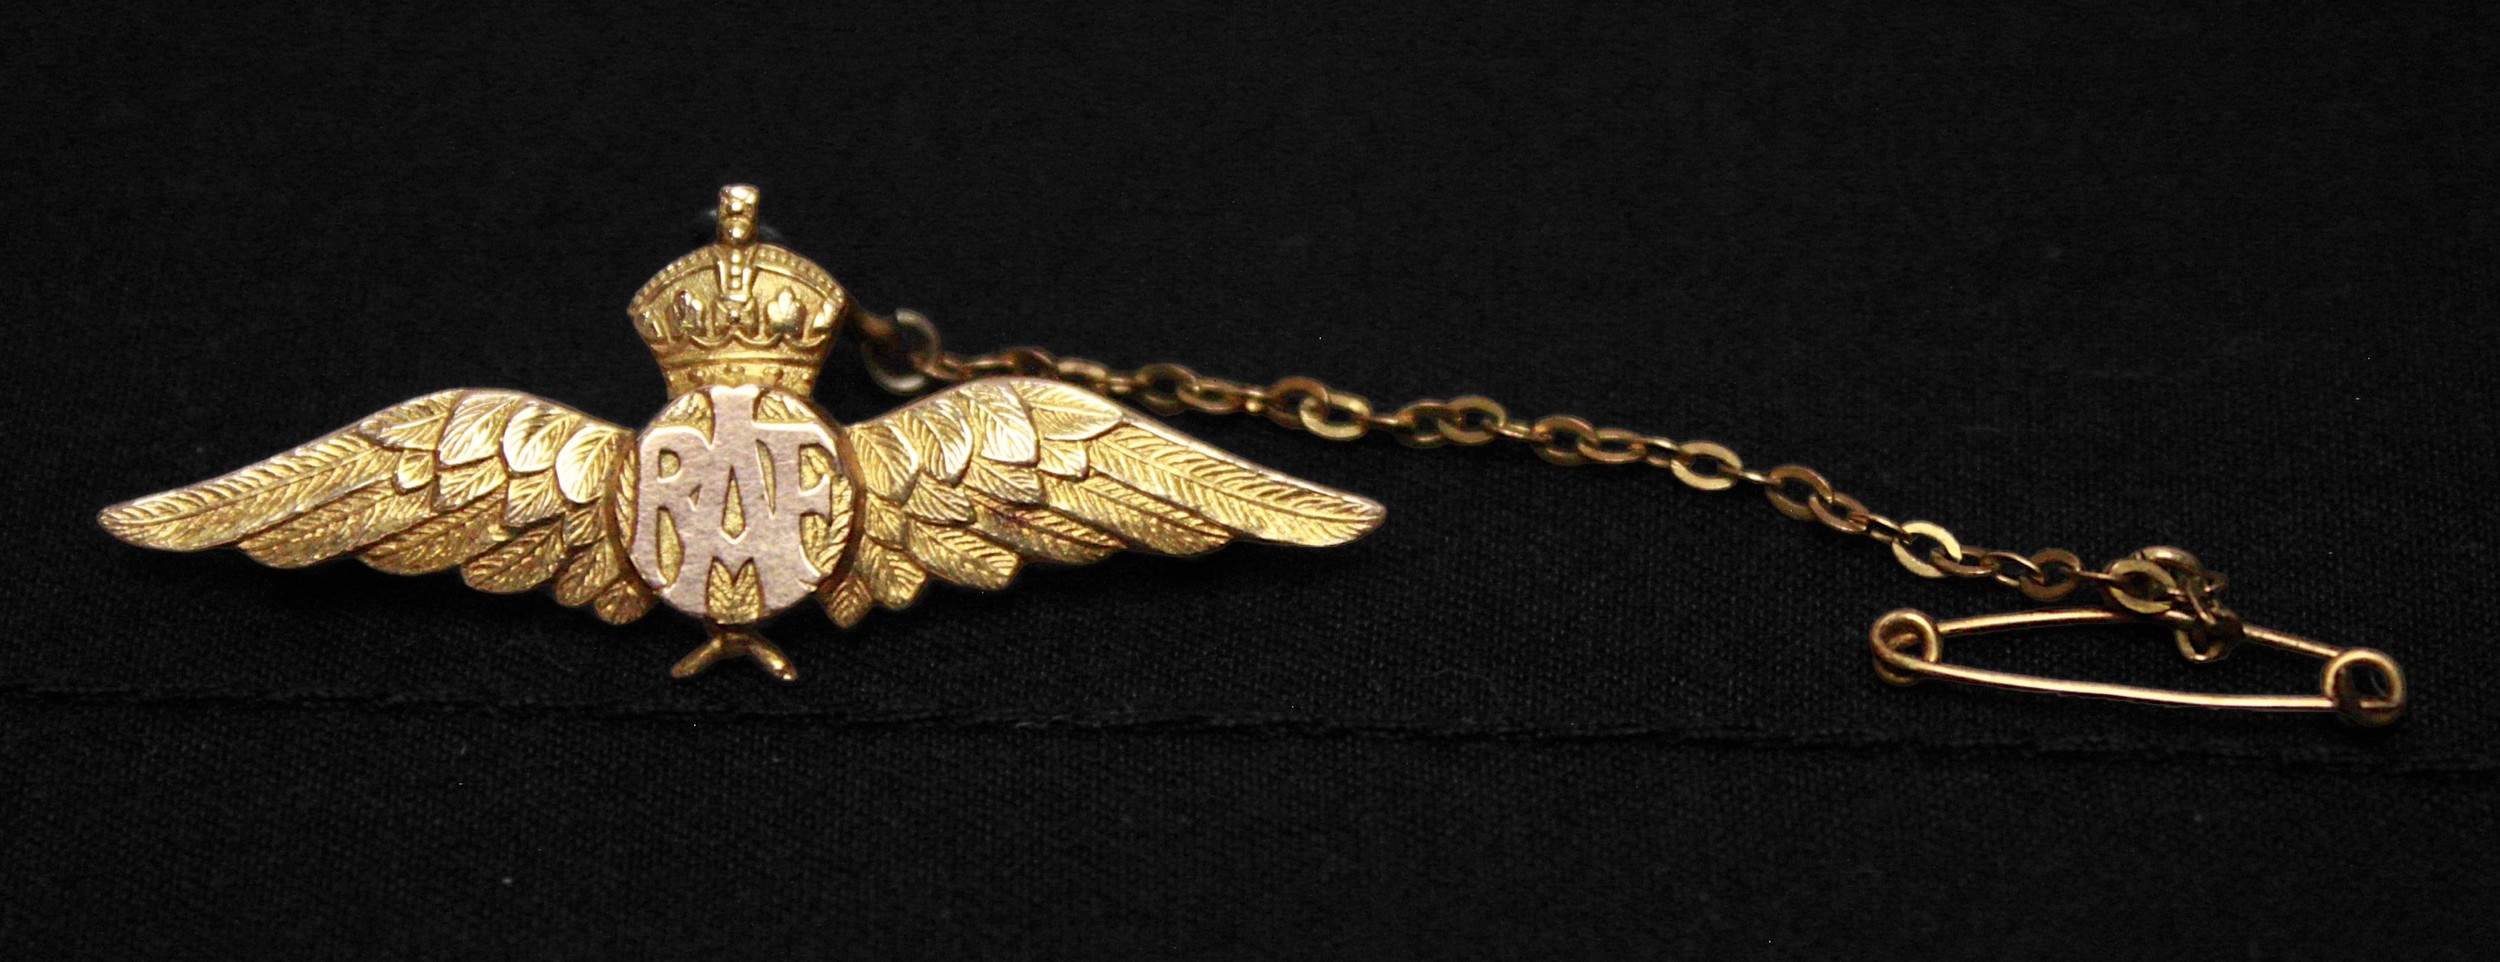 A WWII era 9ct gold RAF sweetheart brooch, modelled with a crown above the initials RAF, flanked